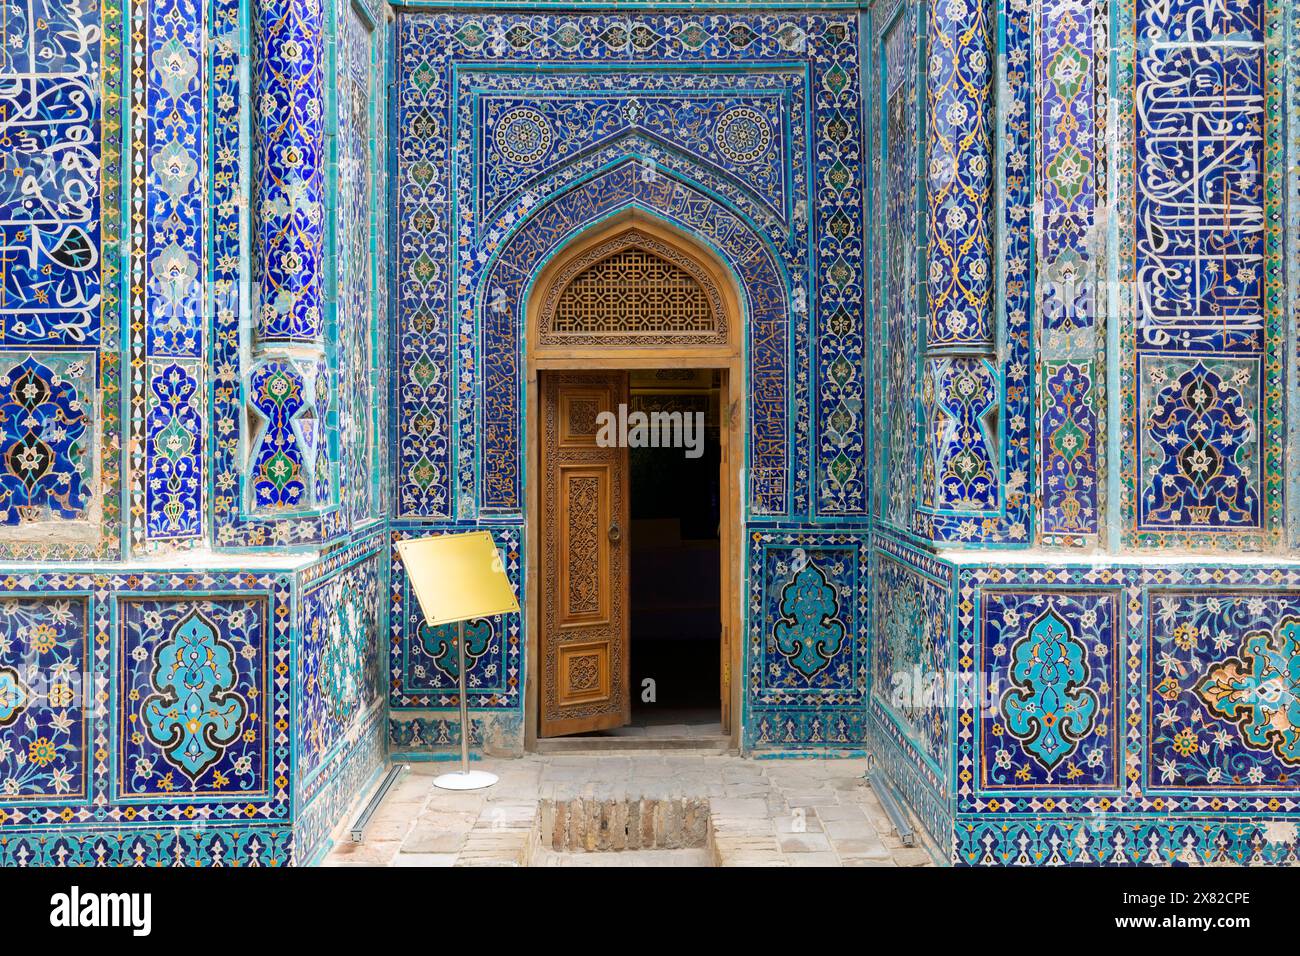 Samarkand, Uzbekistan -  The complex of the mausoleum of Shahi Zinda - Translation: In the name of Allah Almighty who creates Stock Photo